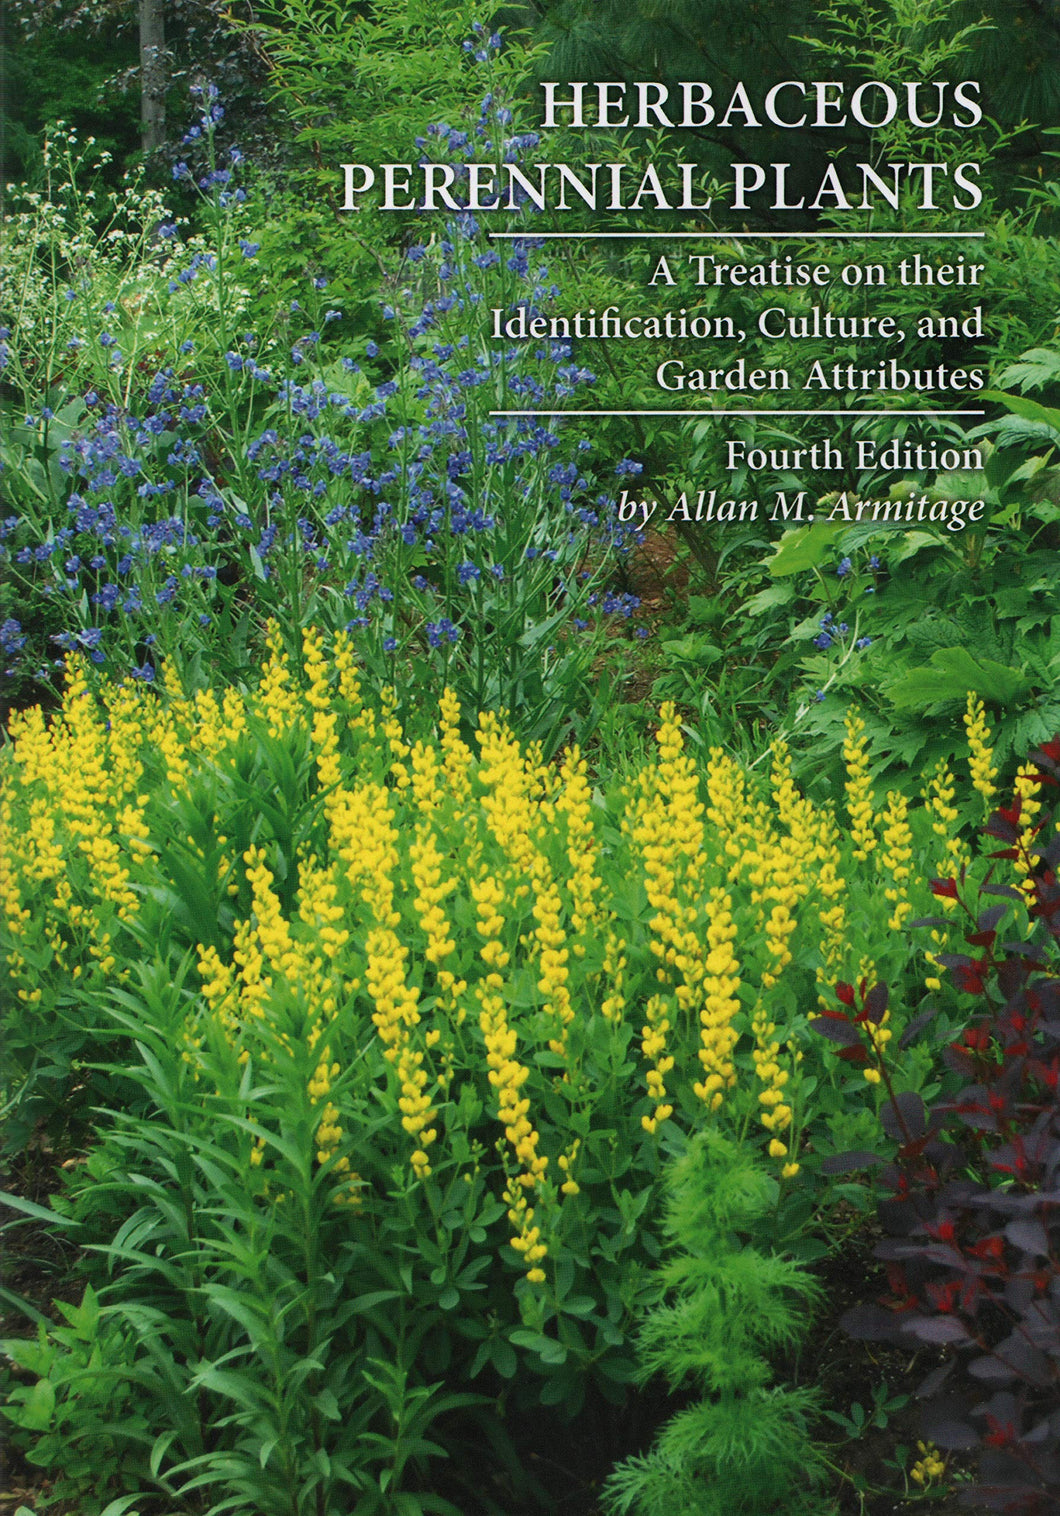 Herbaceous Perennial Plants - 4th Edition